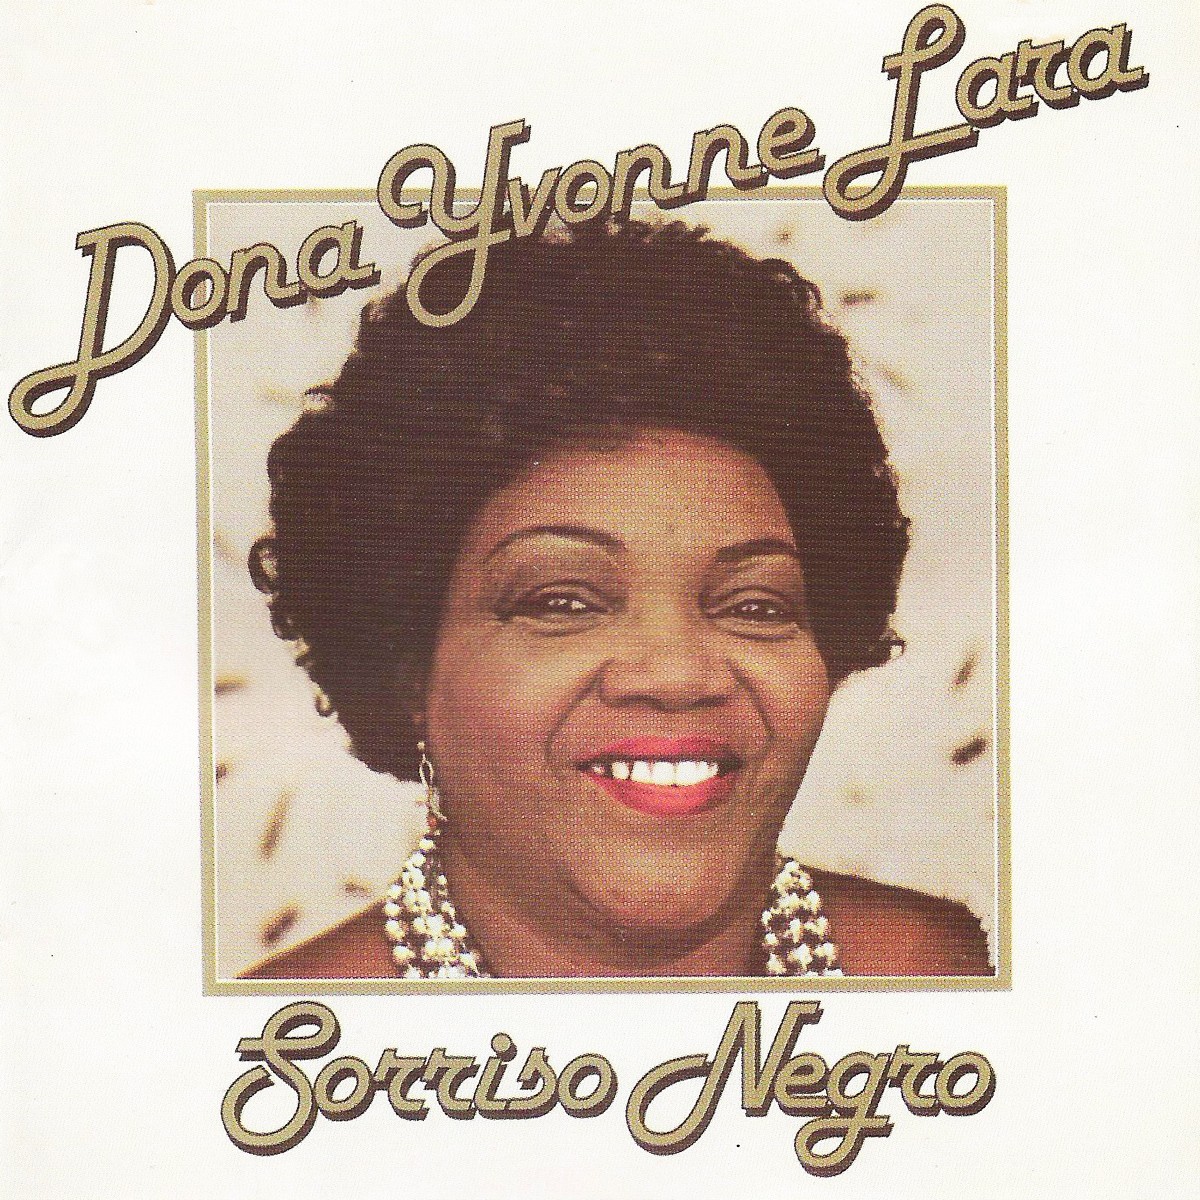 Album released by Dona Ivone Lara in 1981, 'Sorriso Negro' is analyzed from a political point of view in the series 'O Livro do Disco' | Mauro Ferreira's blog